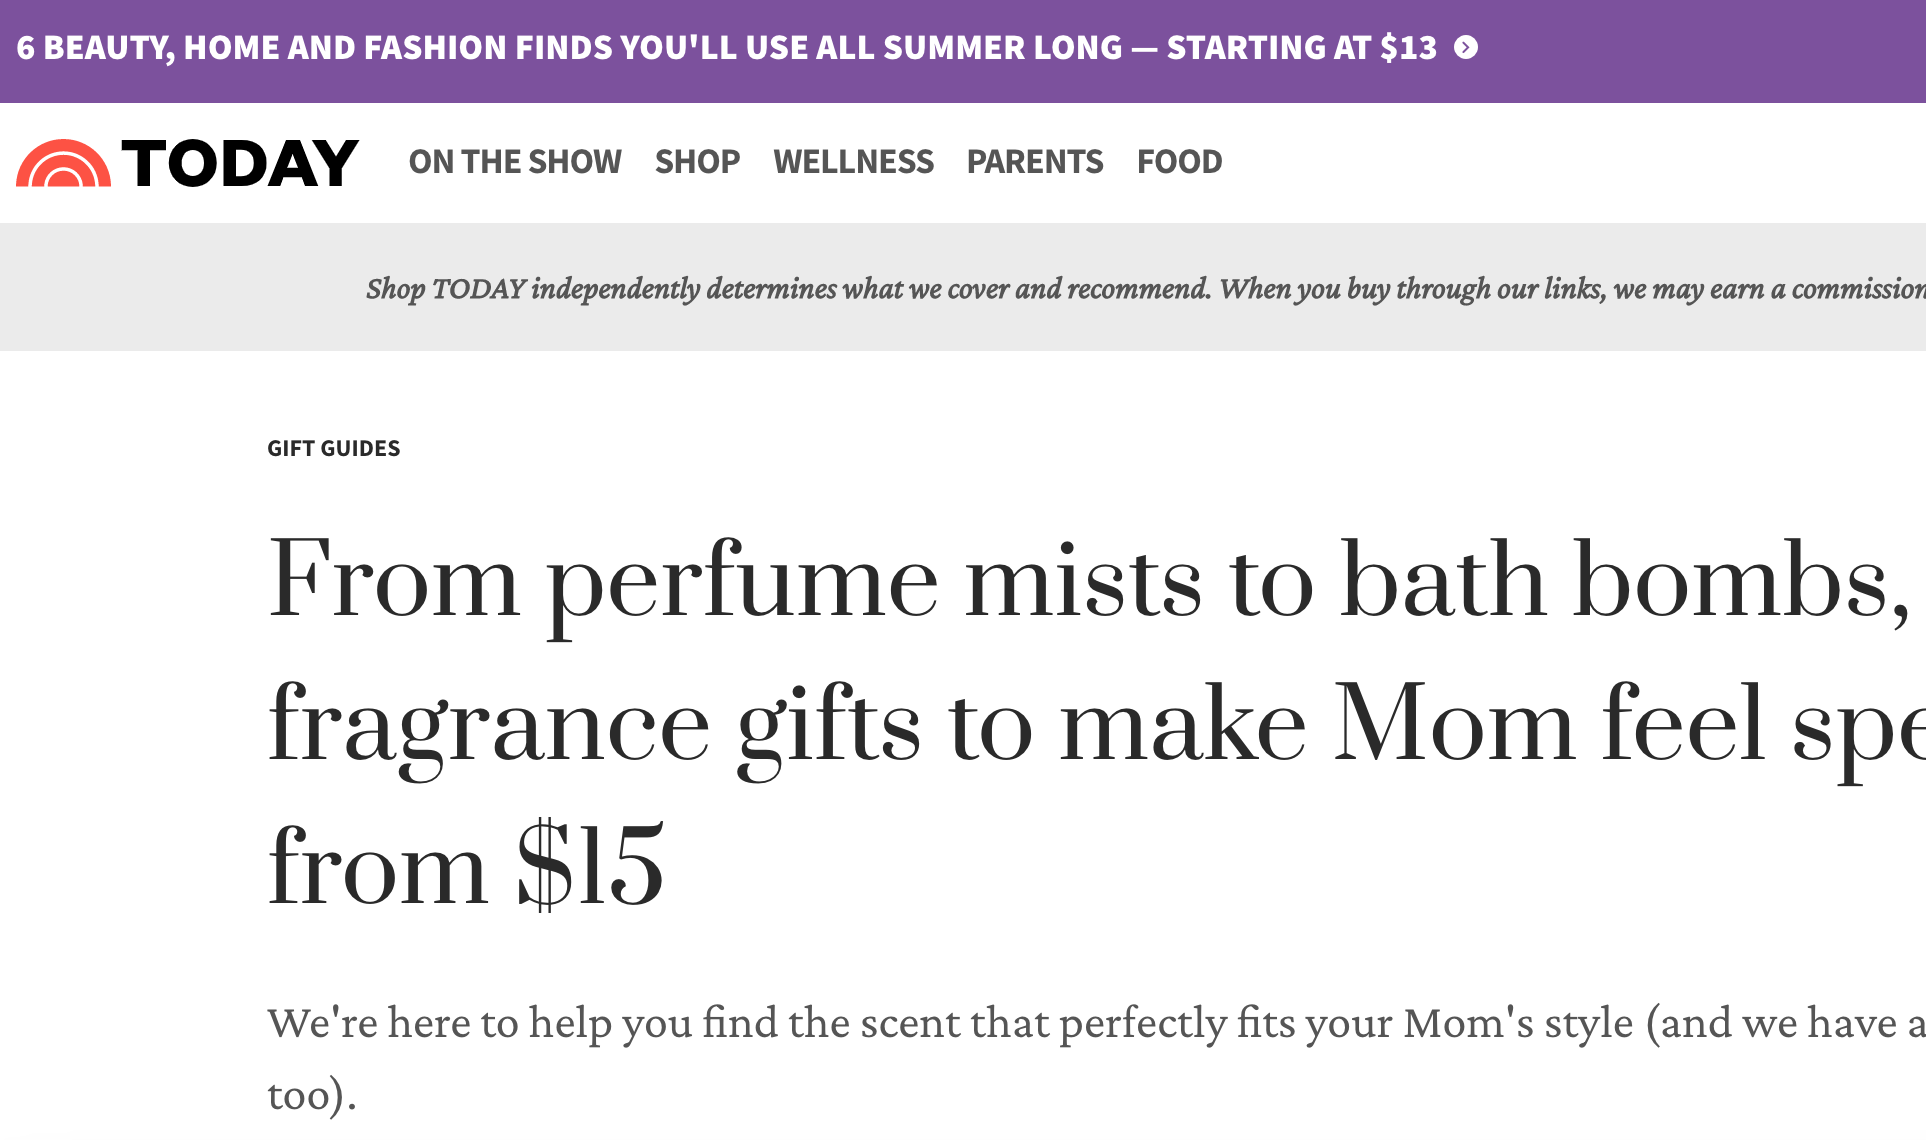 TODAY.com: From perfume mists to bath bombs, 22 fragrance gifts to make Mom feel special — from $15